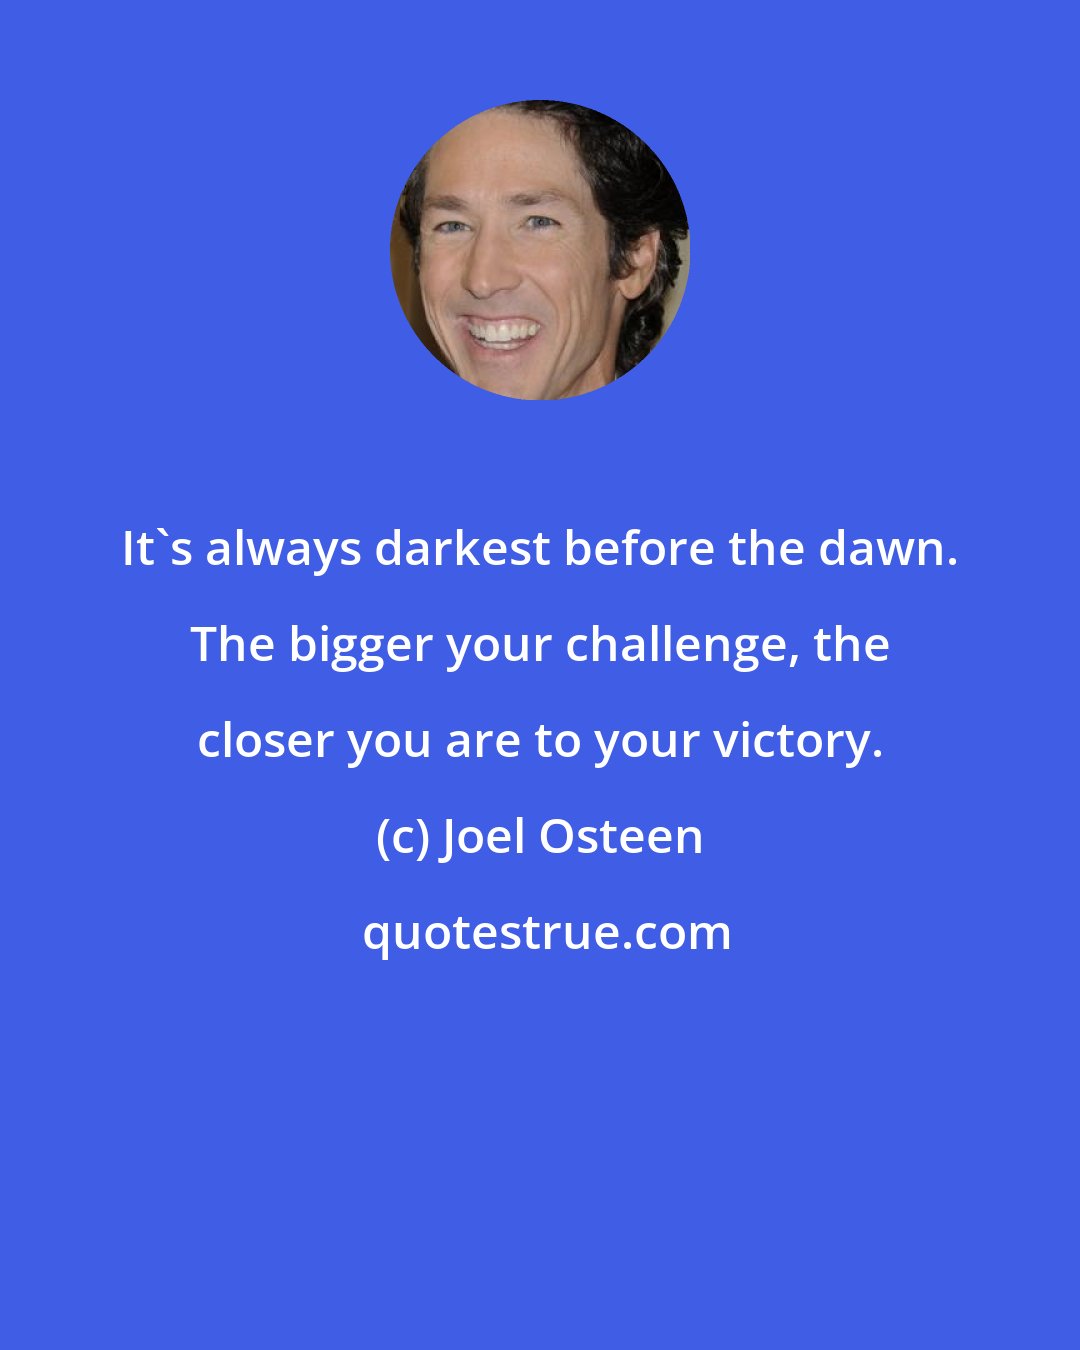 Joel Osteen: It's always darkest before the dawn. The bigger your challenge, the closer you are to your victory.